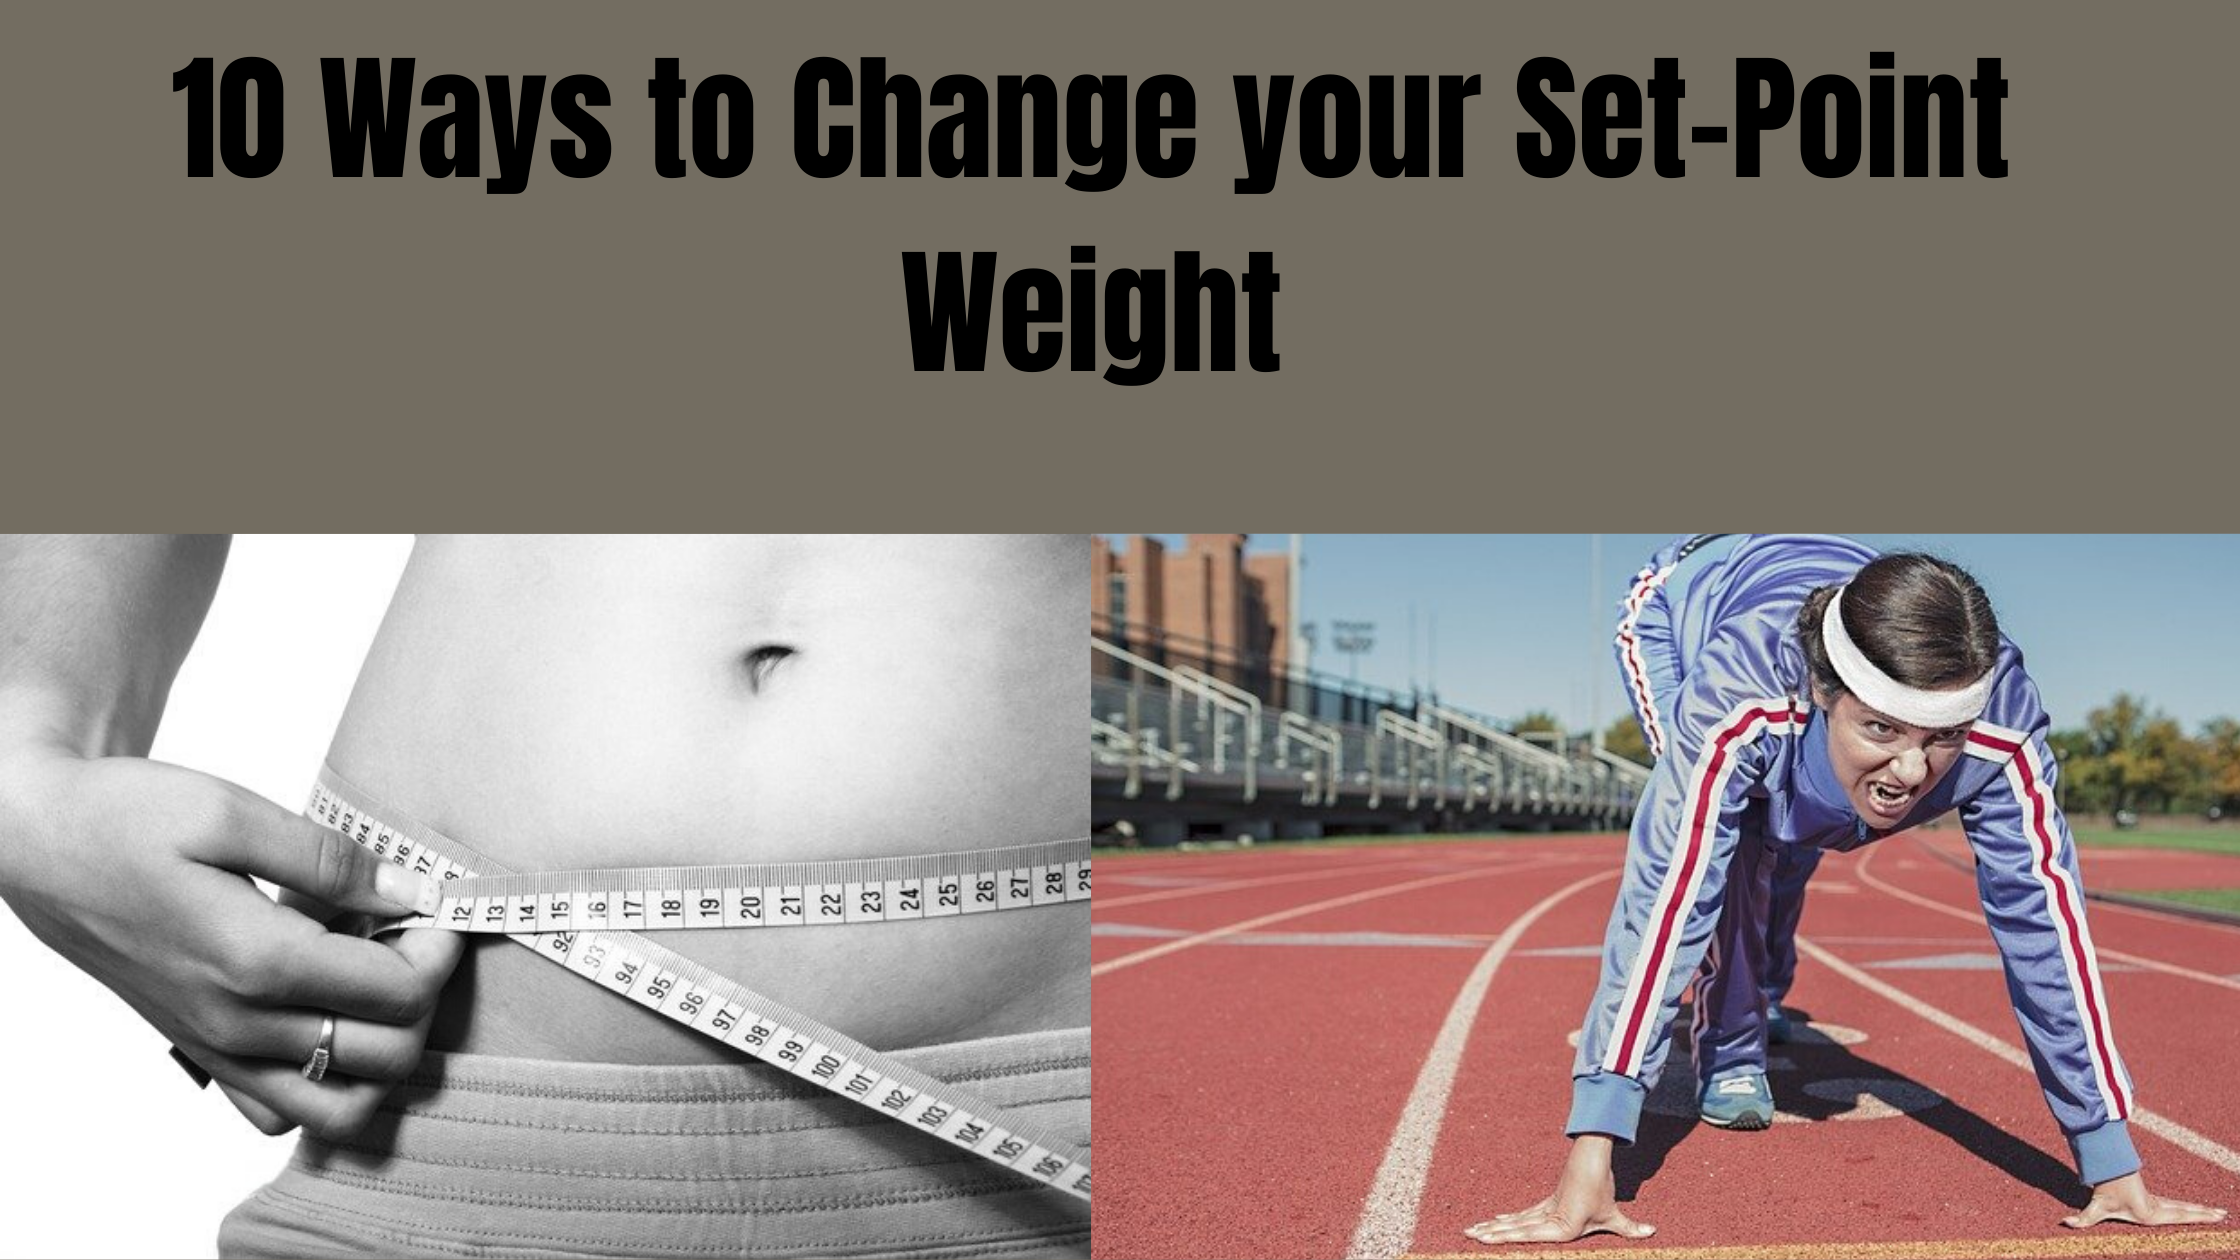 10 Ways to Change Your Set-point Weight